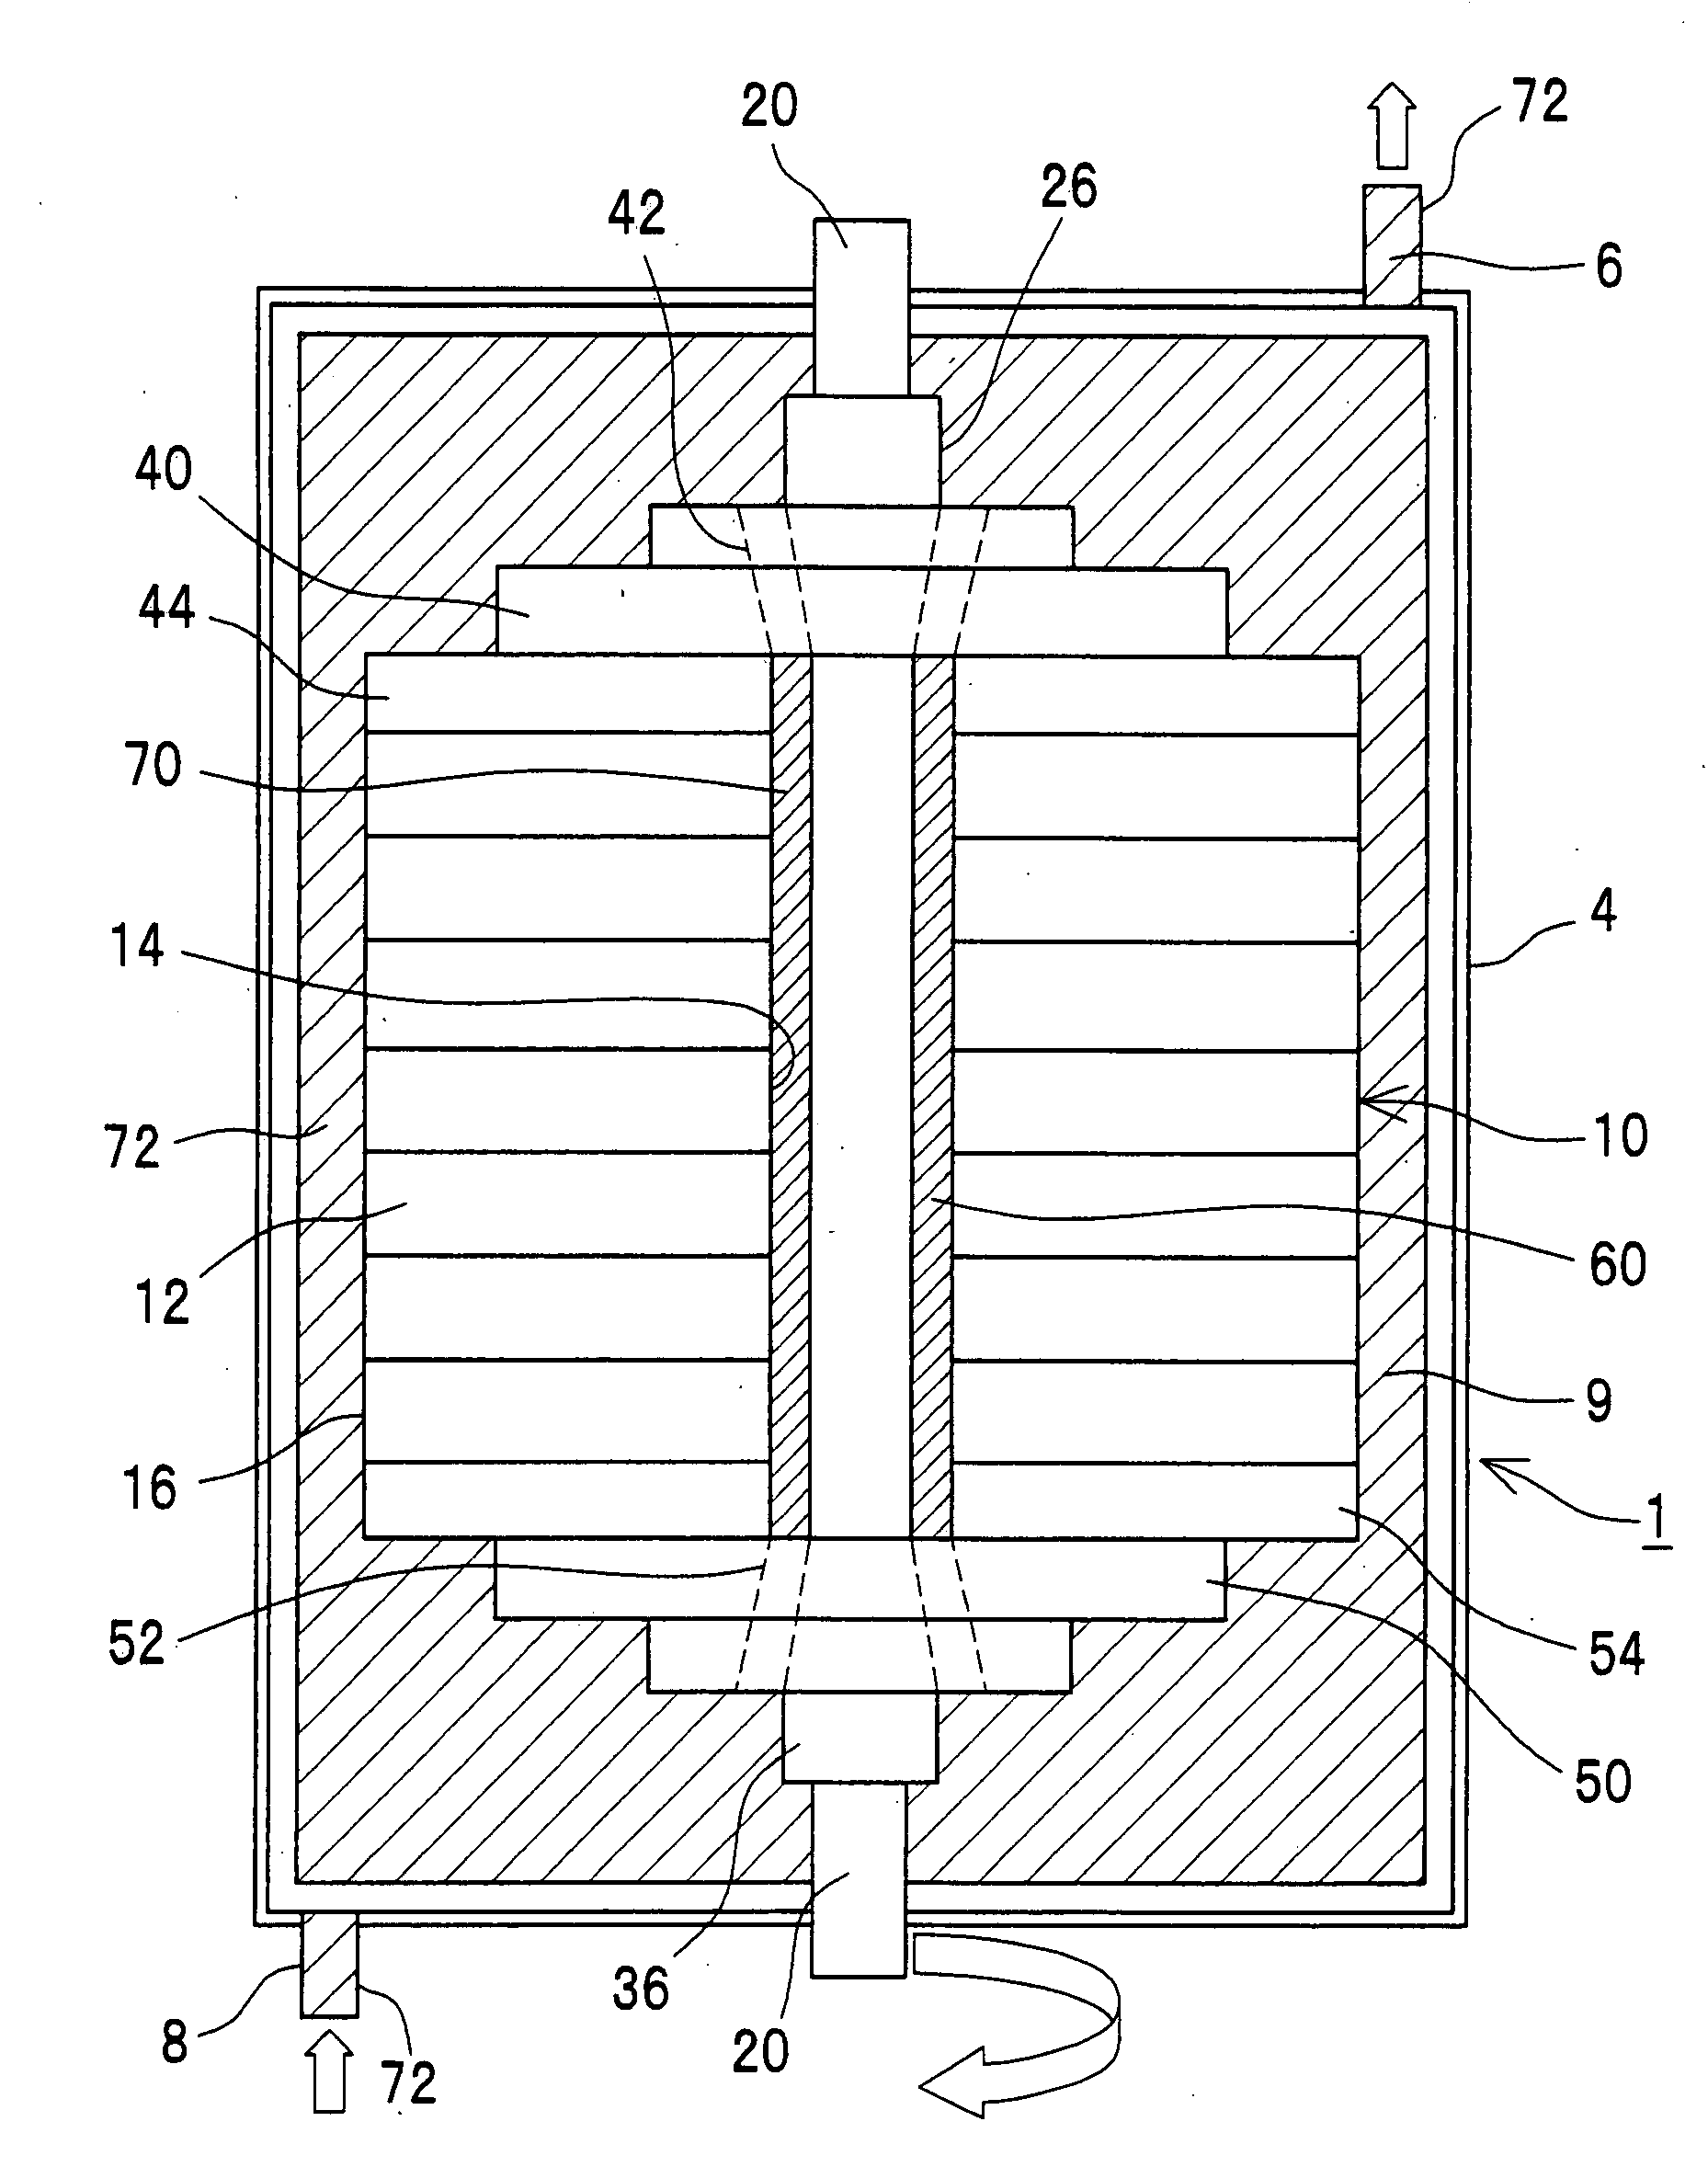 Glass disk processing method